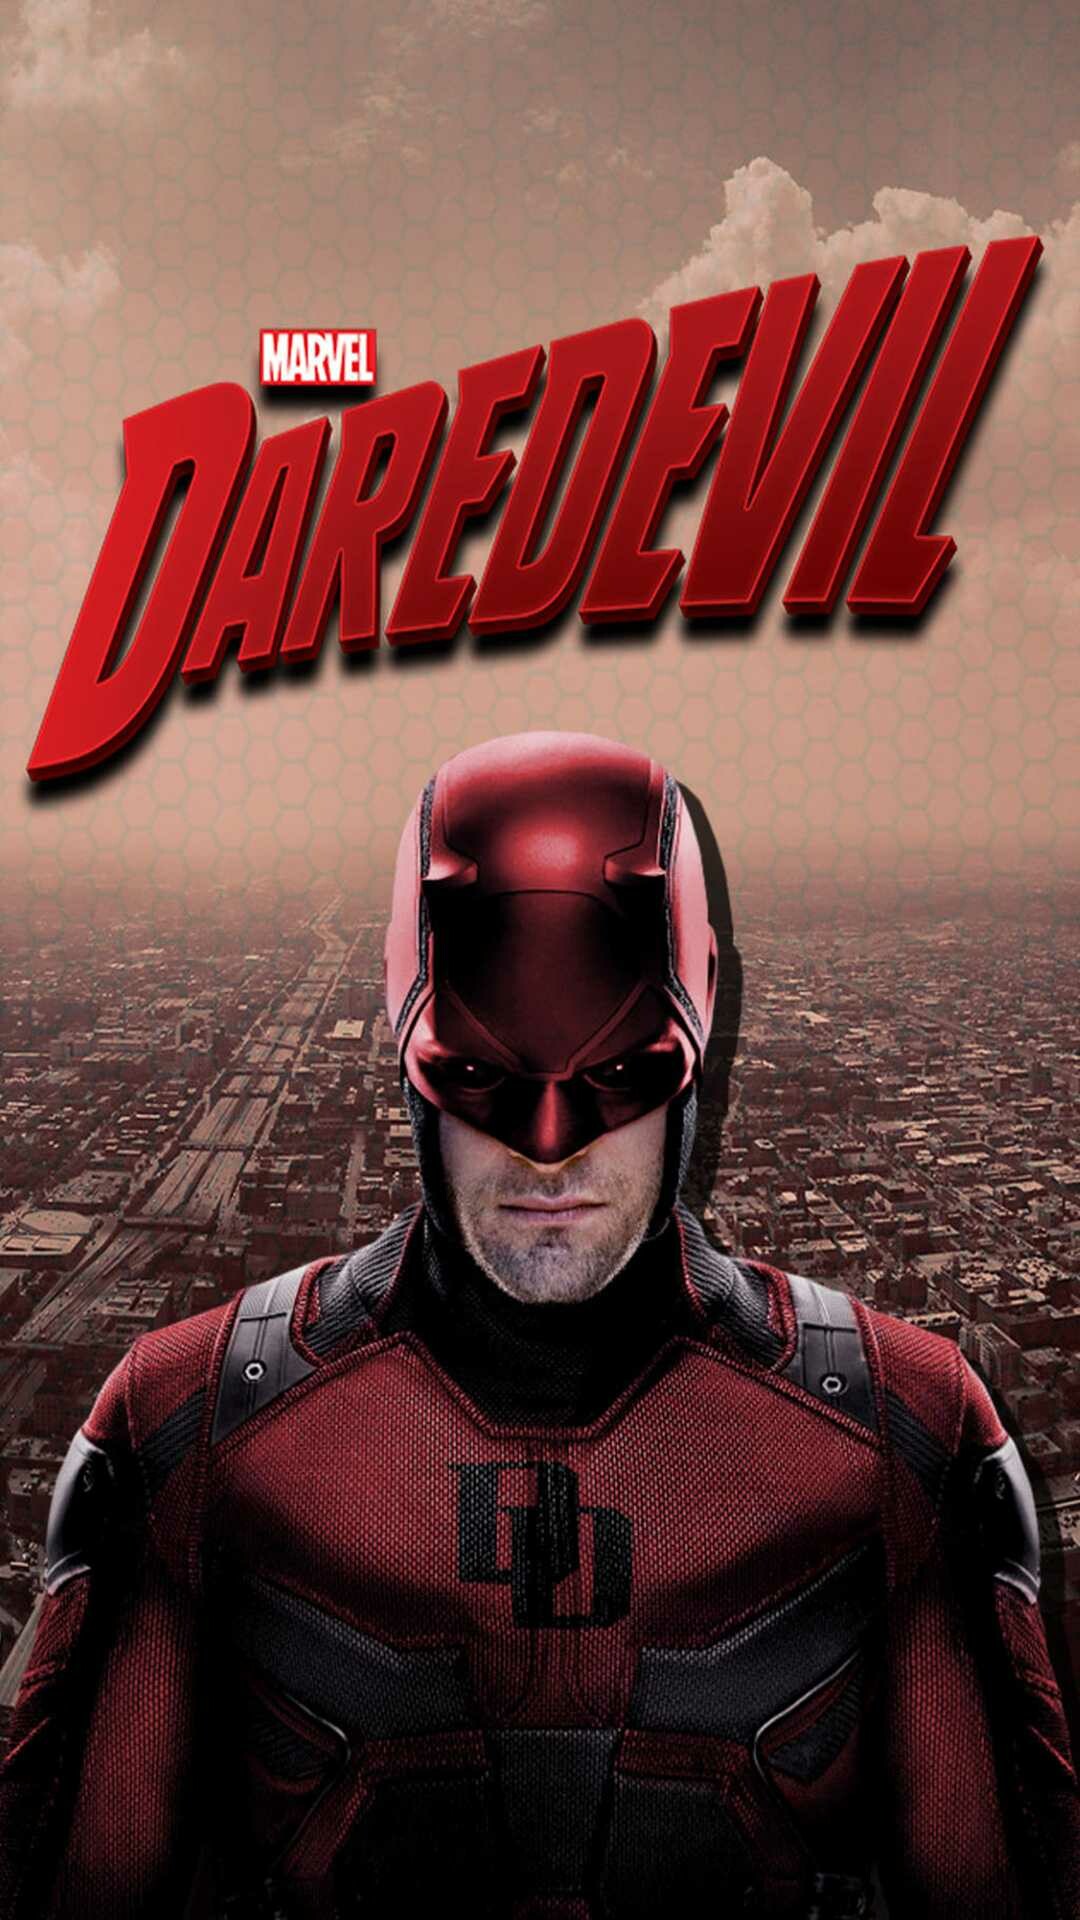 Daredevil (TV Series): The third television show in the Marvel Cinematic Universe. 1080x1920 Full HD Background.